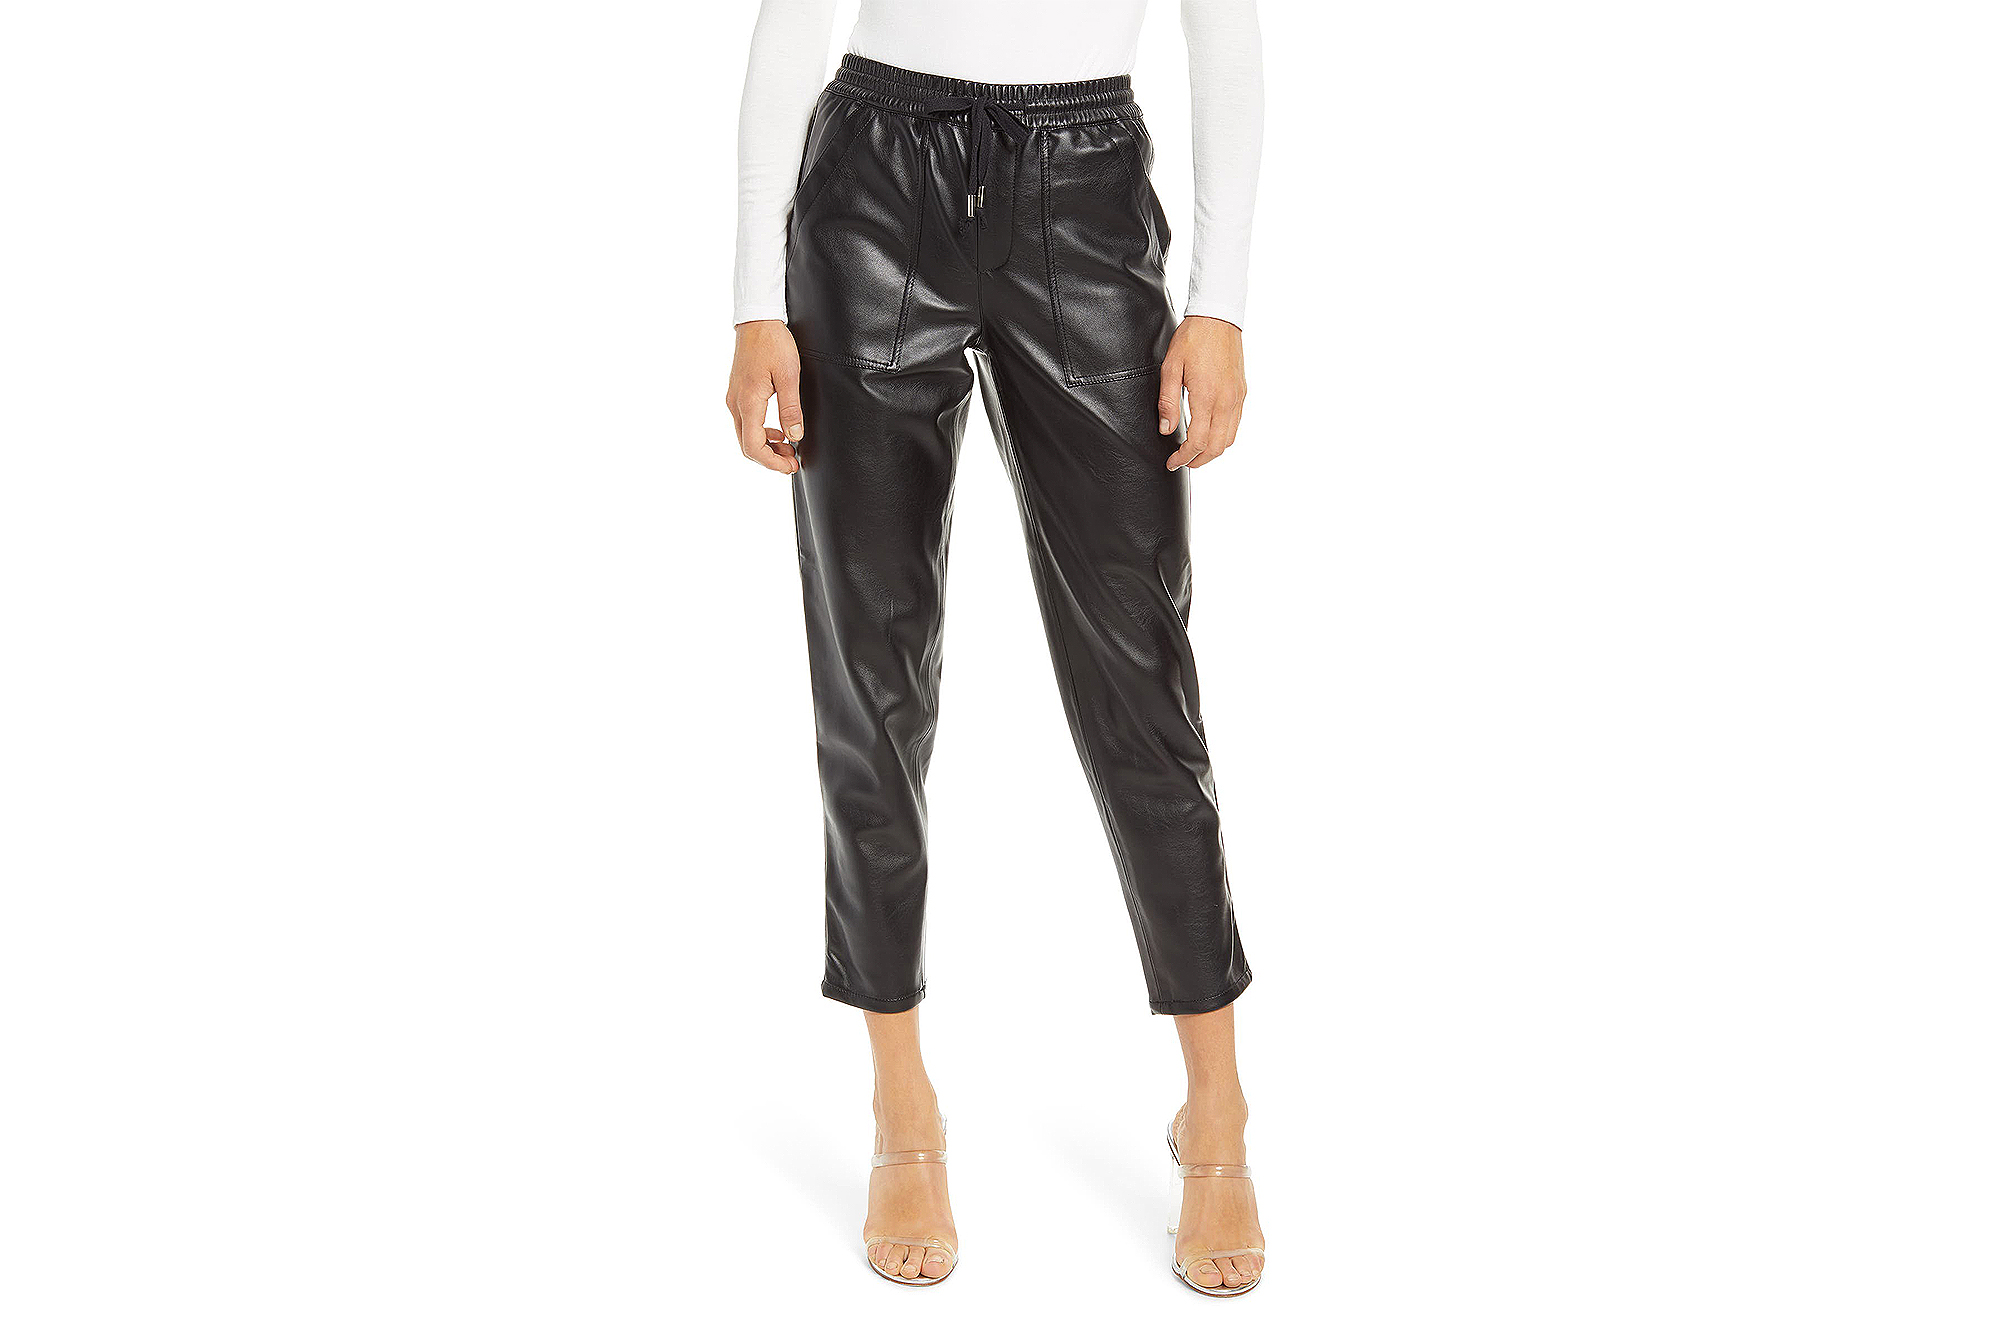 10 Undeniable Benefits of Wearing Leather Pants | LeatherCult